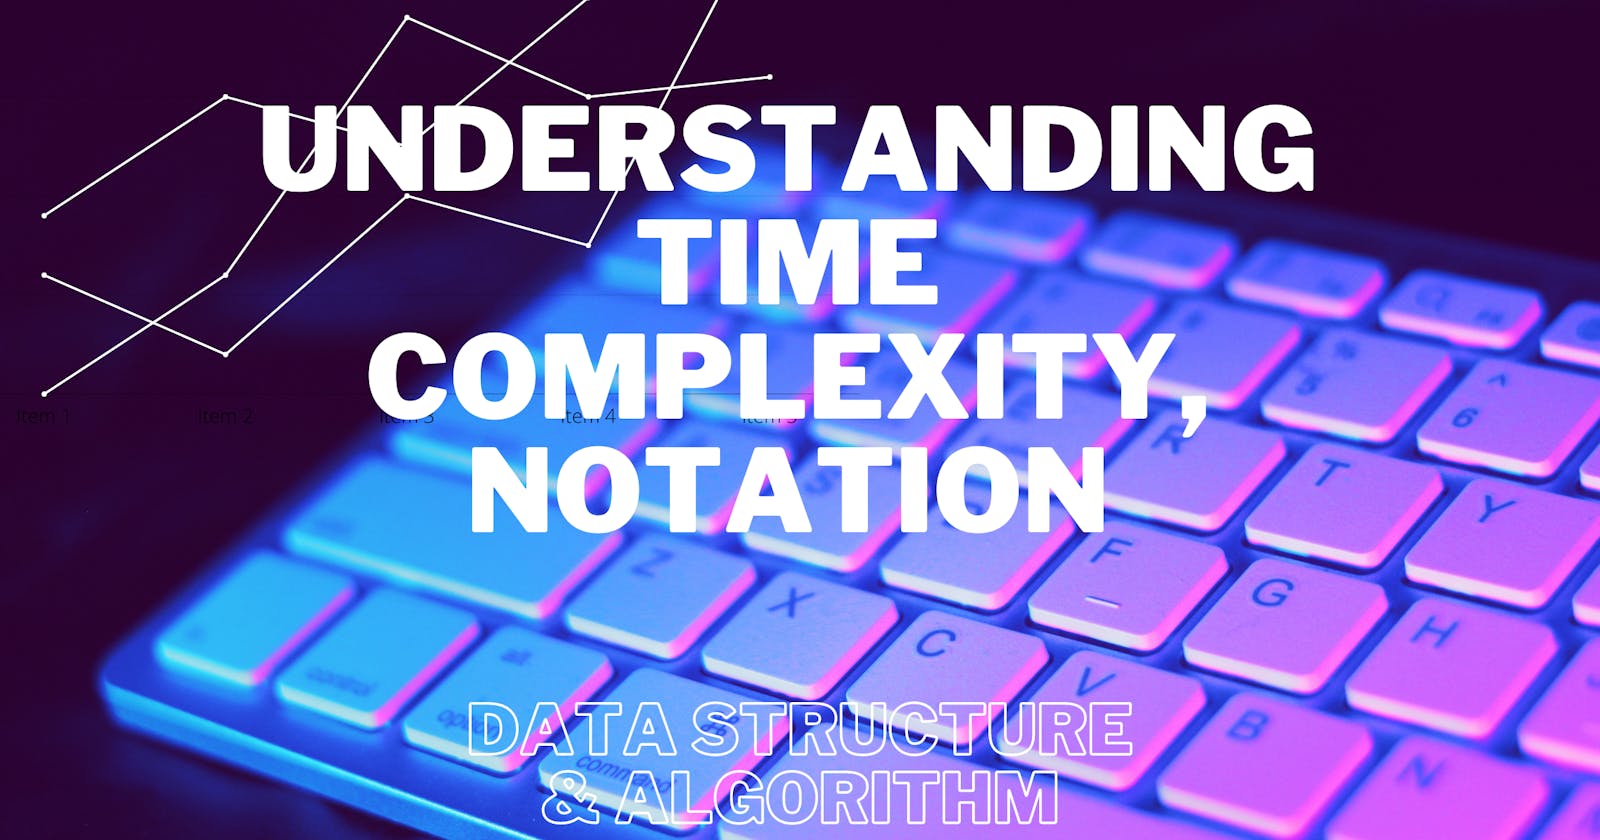 Understanding time complexity, Notation